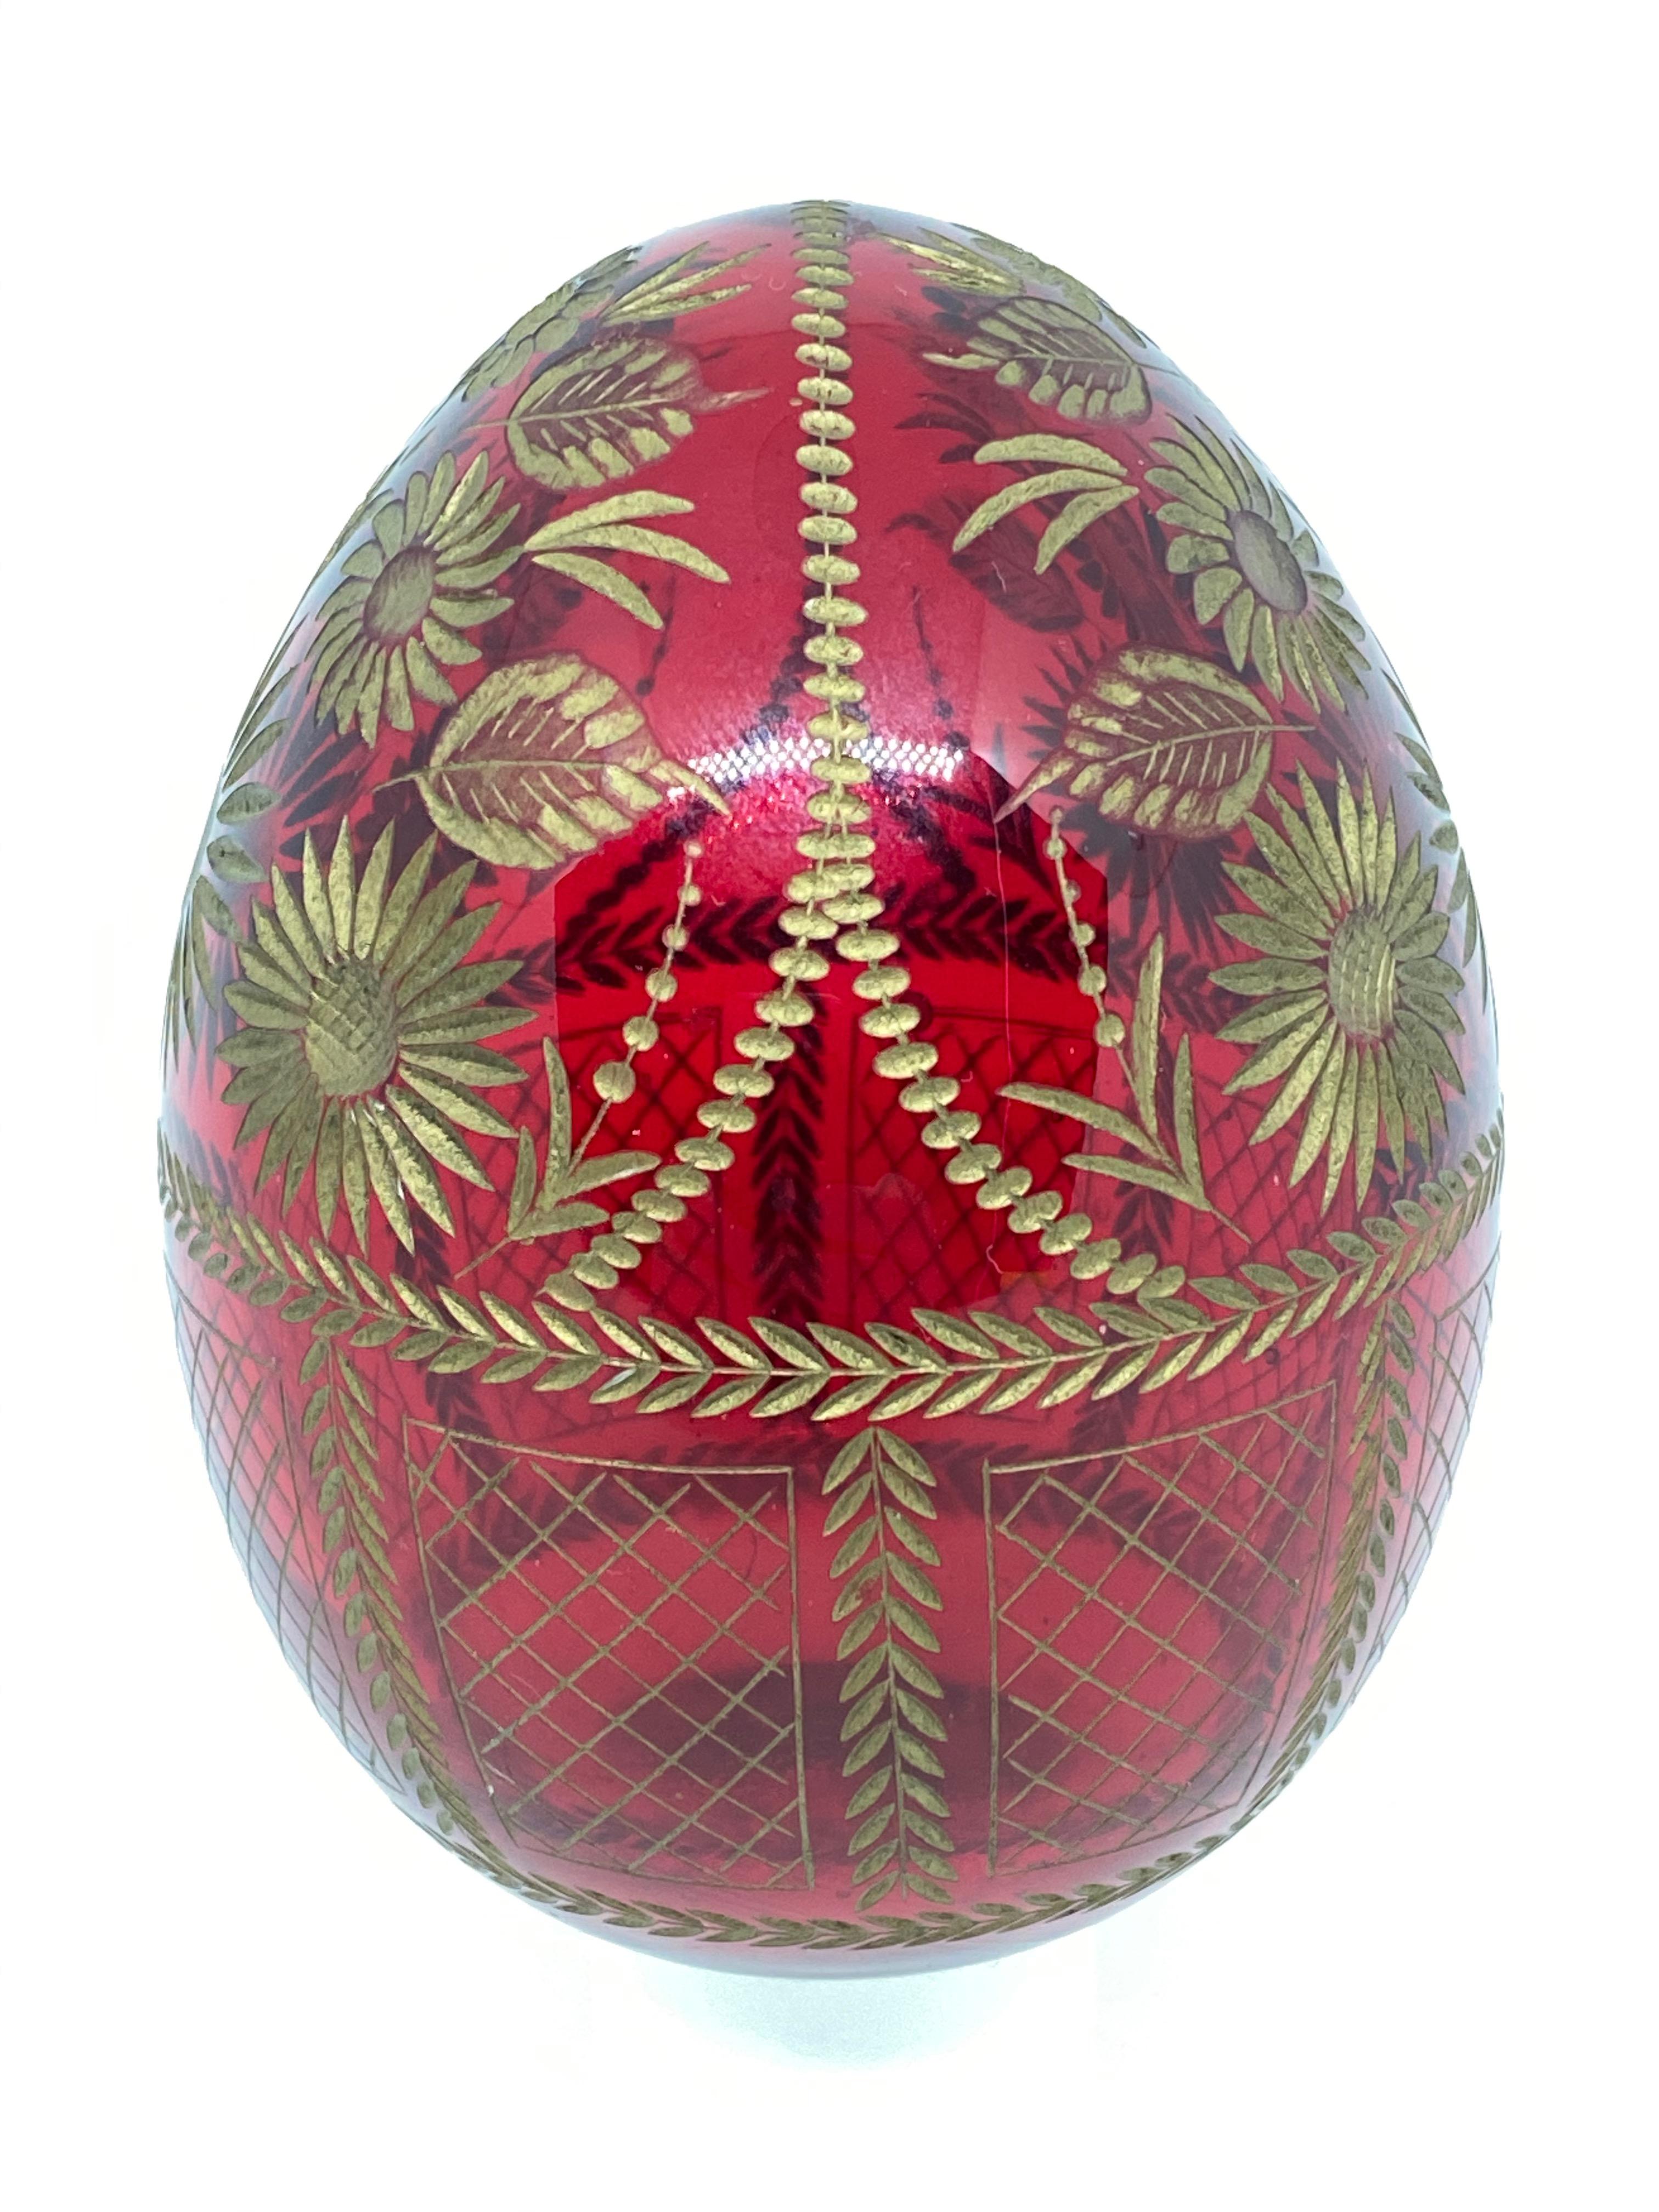 Art Nouveau Vintage Faberge Russia Style Glass Egg with Etched Russian Folk Art Flowers